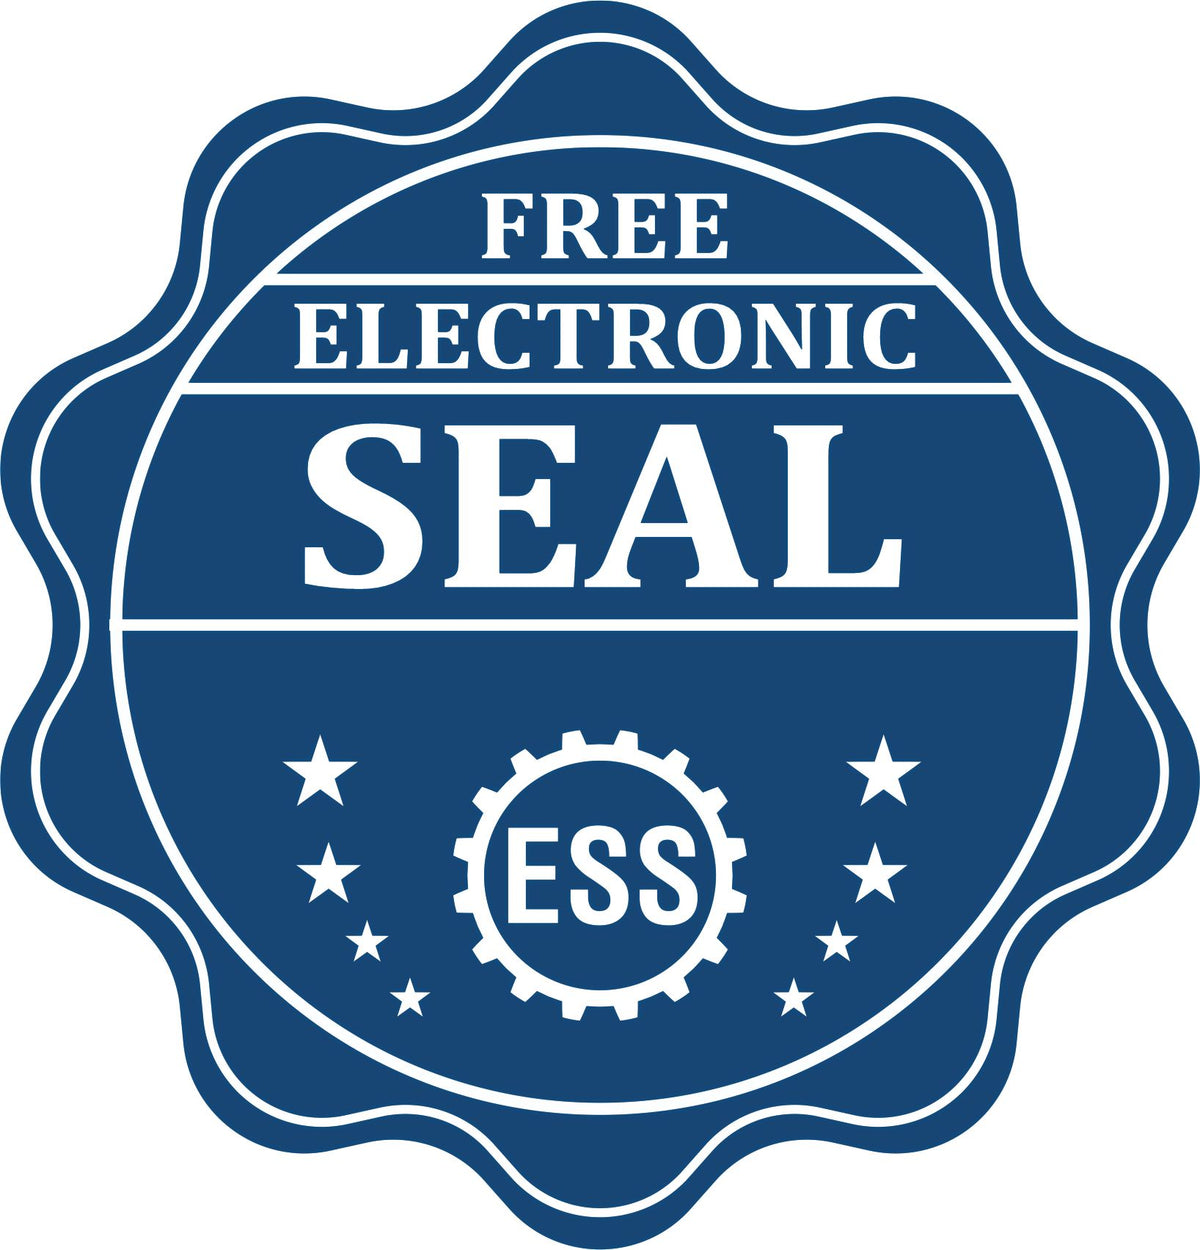 A badge showing a free electronic seal for the Heavy Duty Cast Iron West Virginia Architect Embosser with stars and the ESS gear on the emblem.